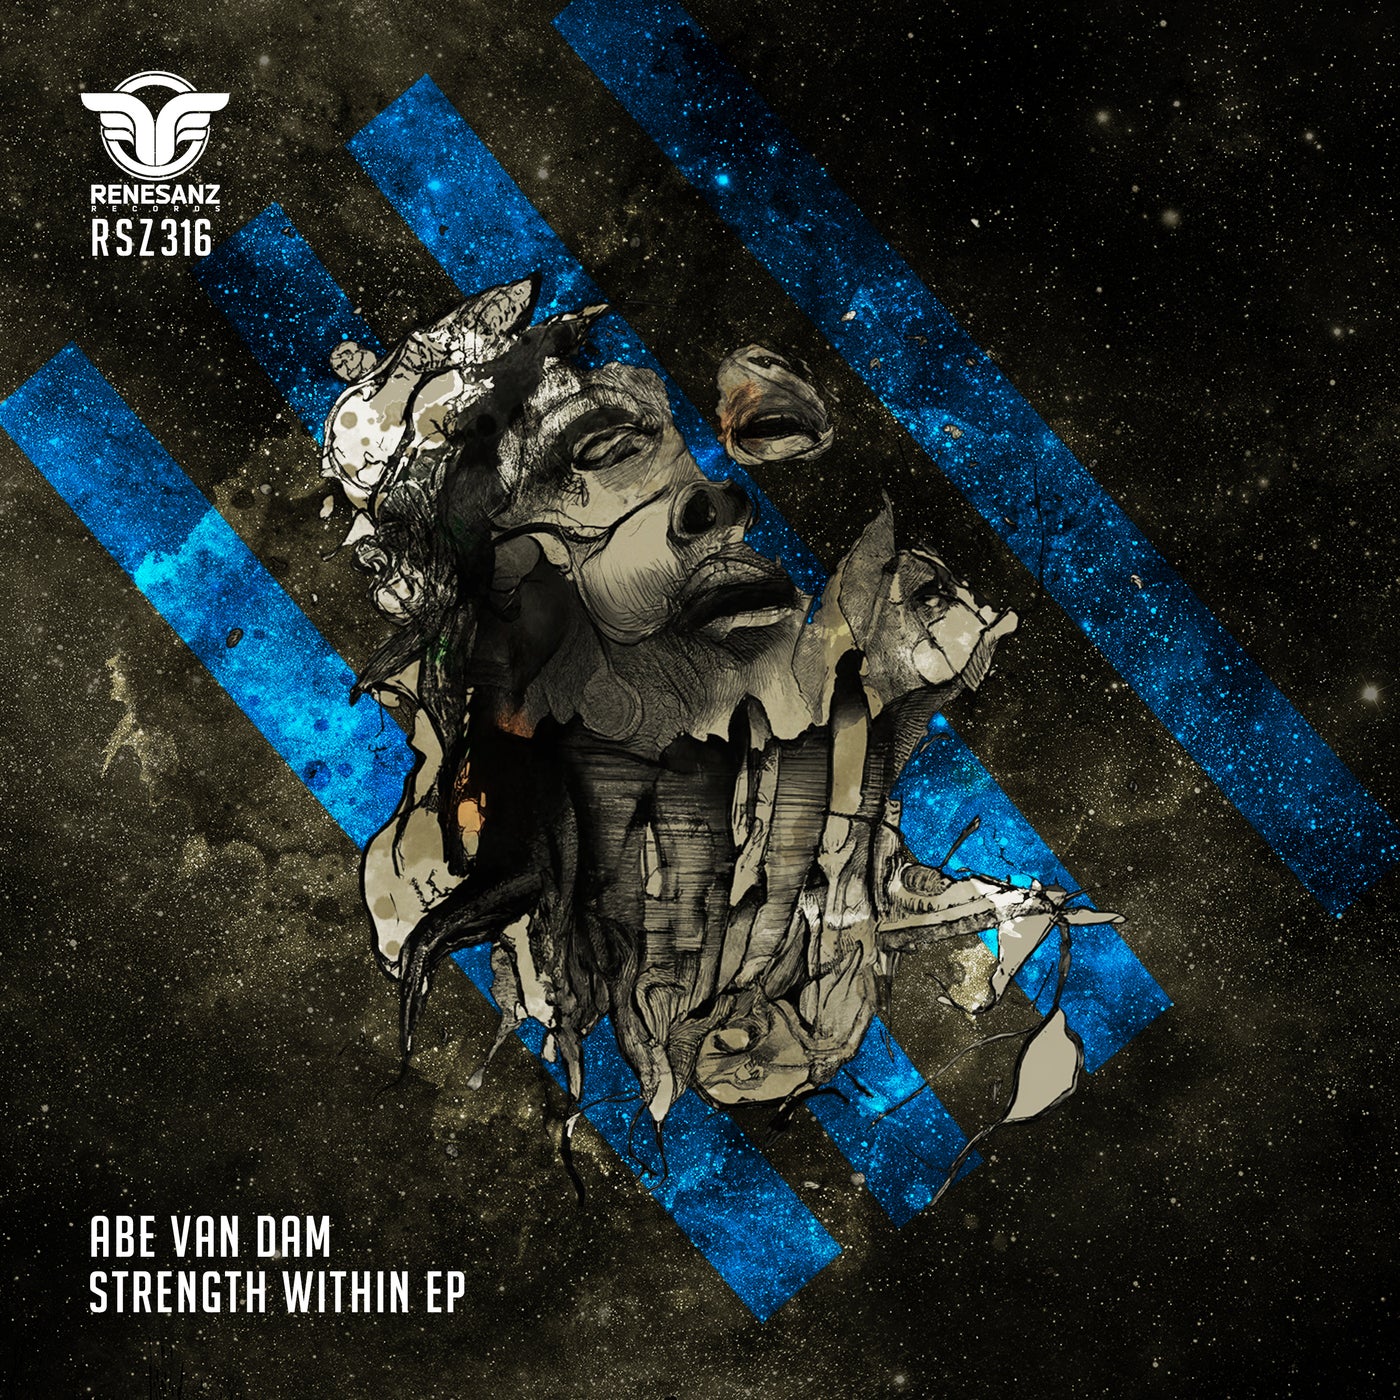 Strength Within EP